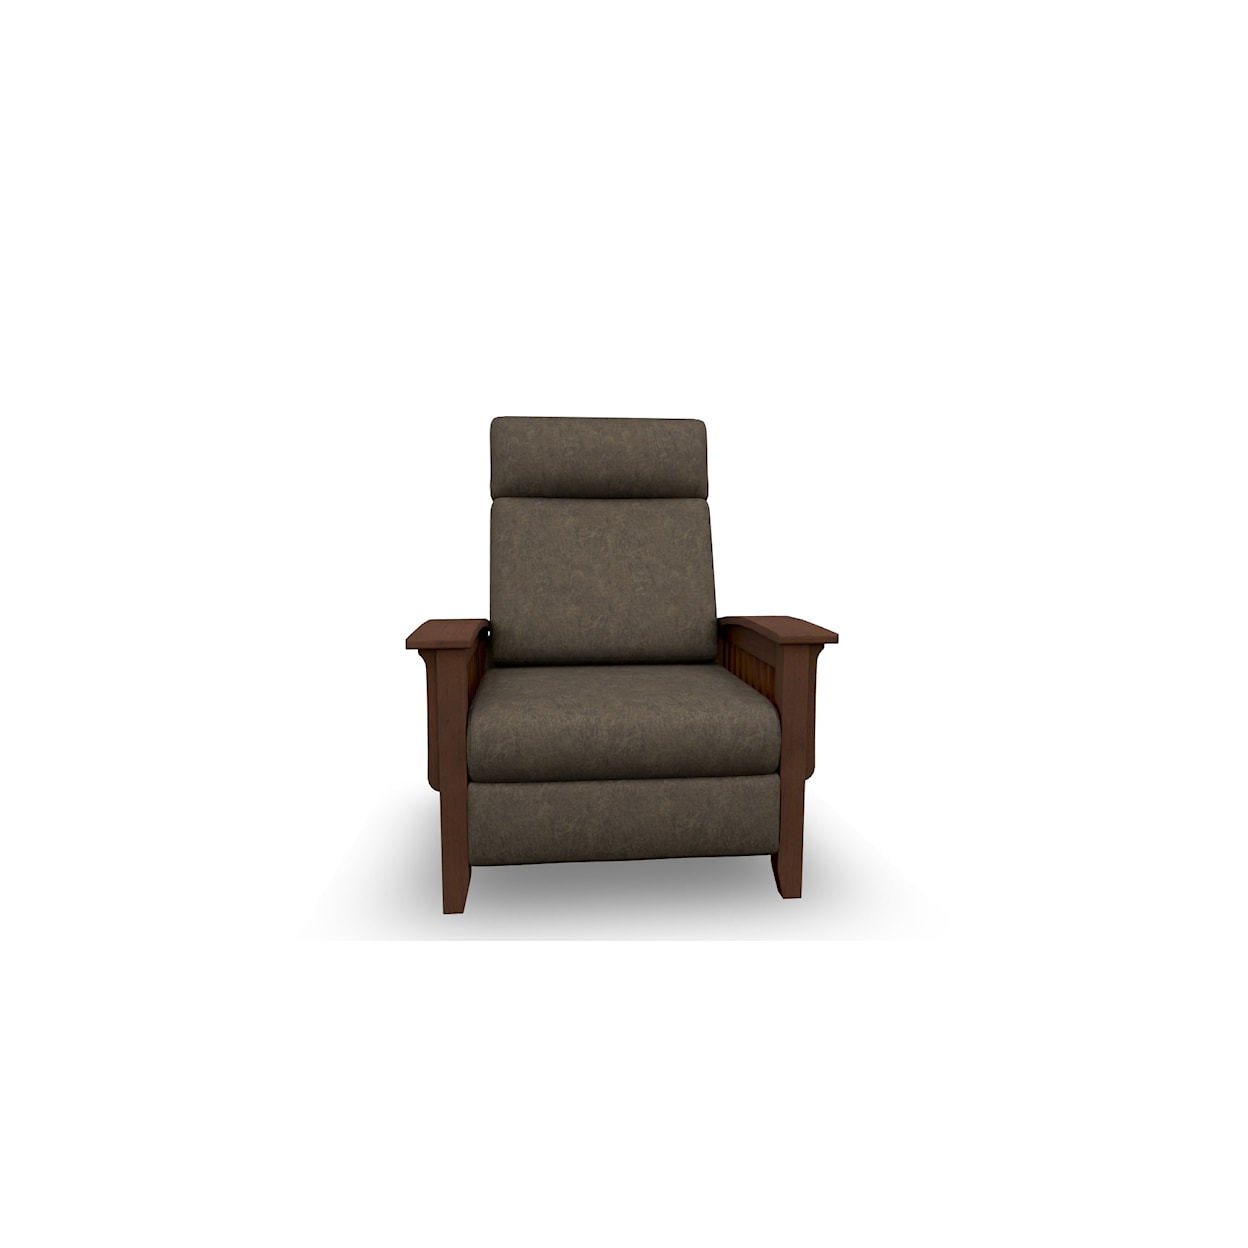 Best Home Furnishings Tuscan Pushback Recliner